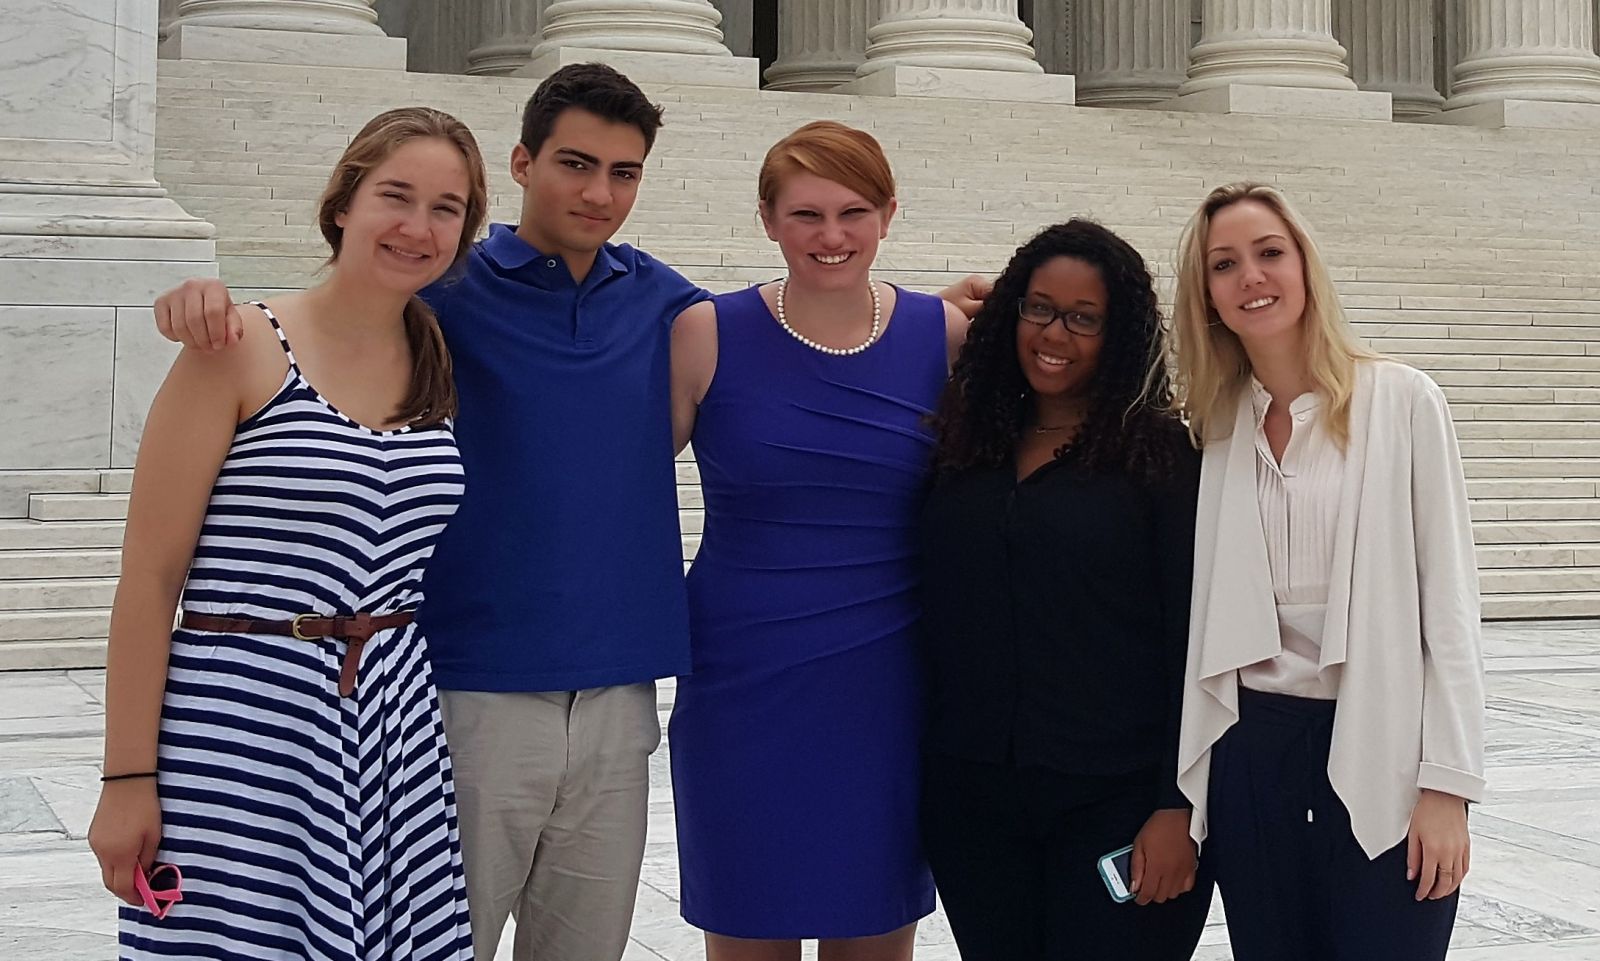 CCE interns after touring the U.S. Supreme Court